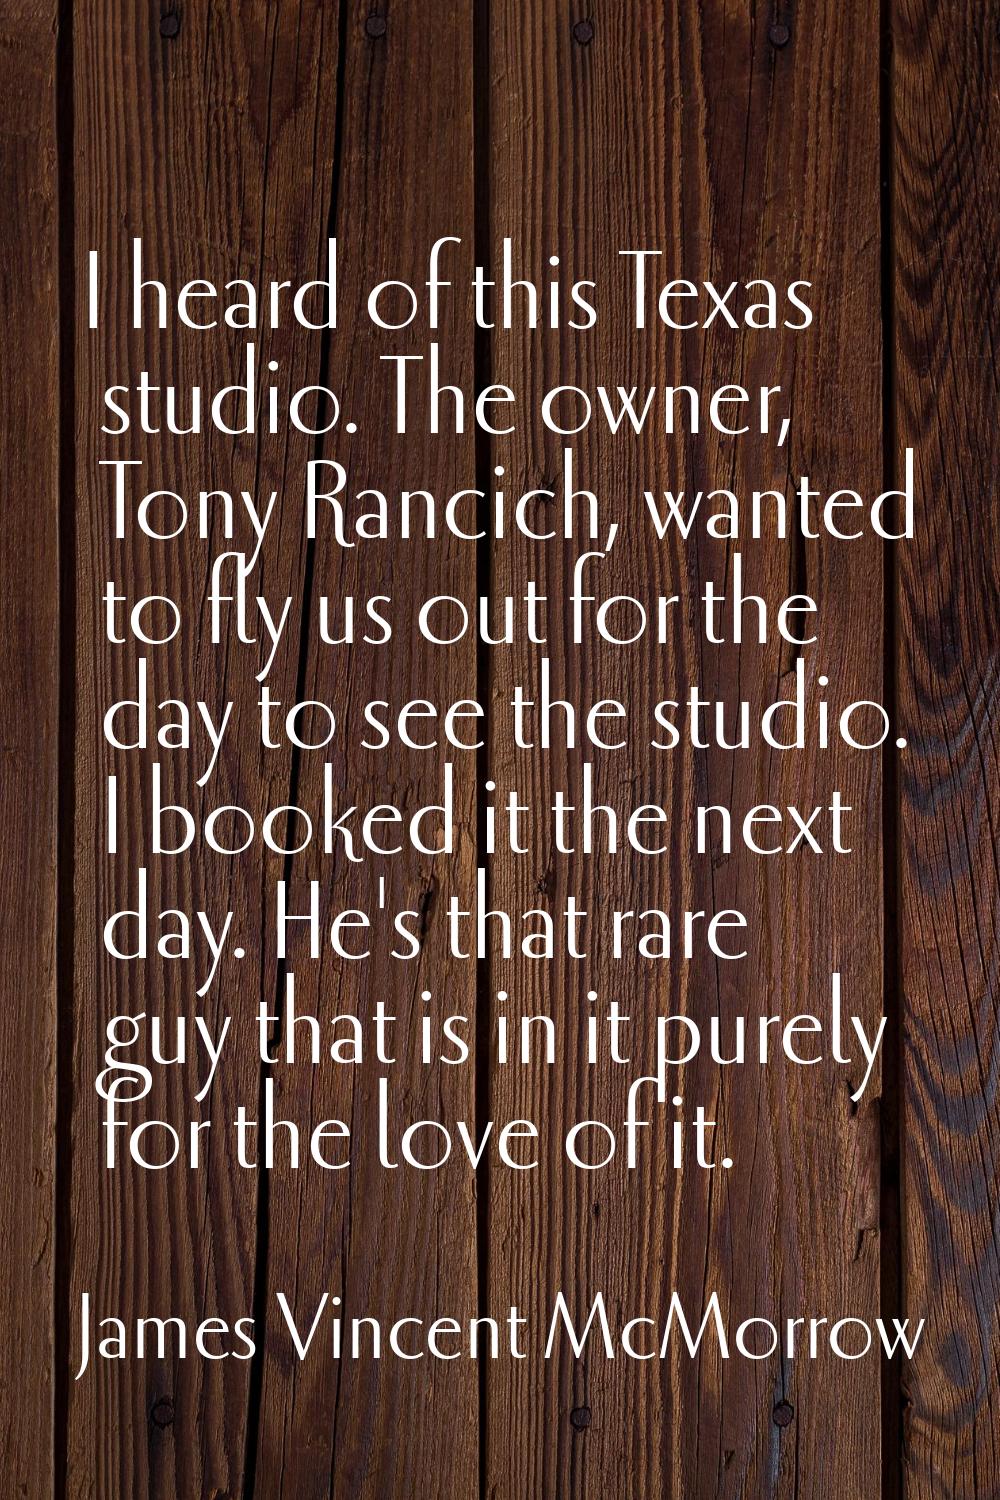 I heard of this Texas studio. The owner, Tony Rancich, wanted to fly us out for the day to see the 